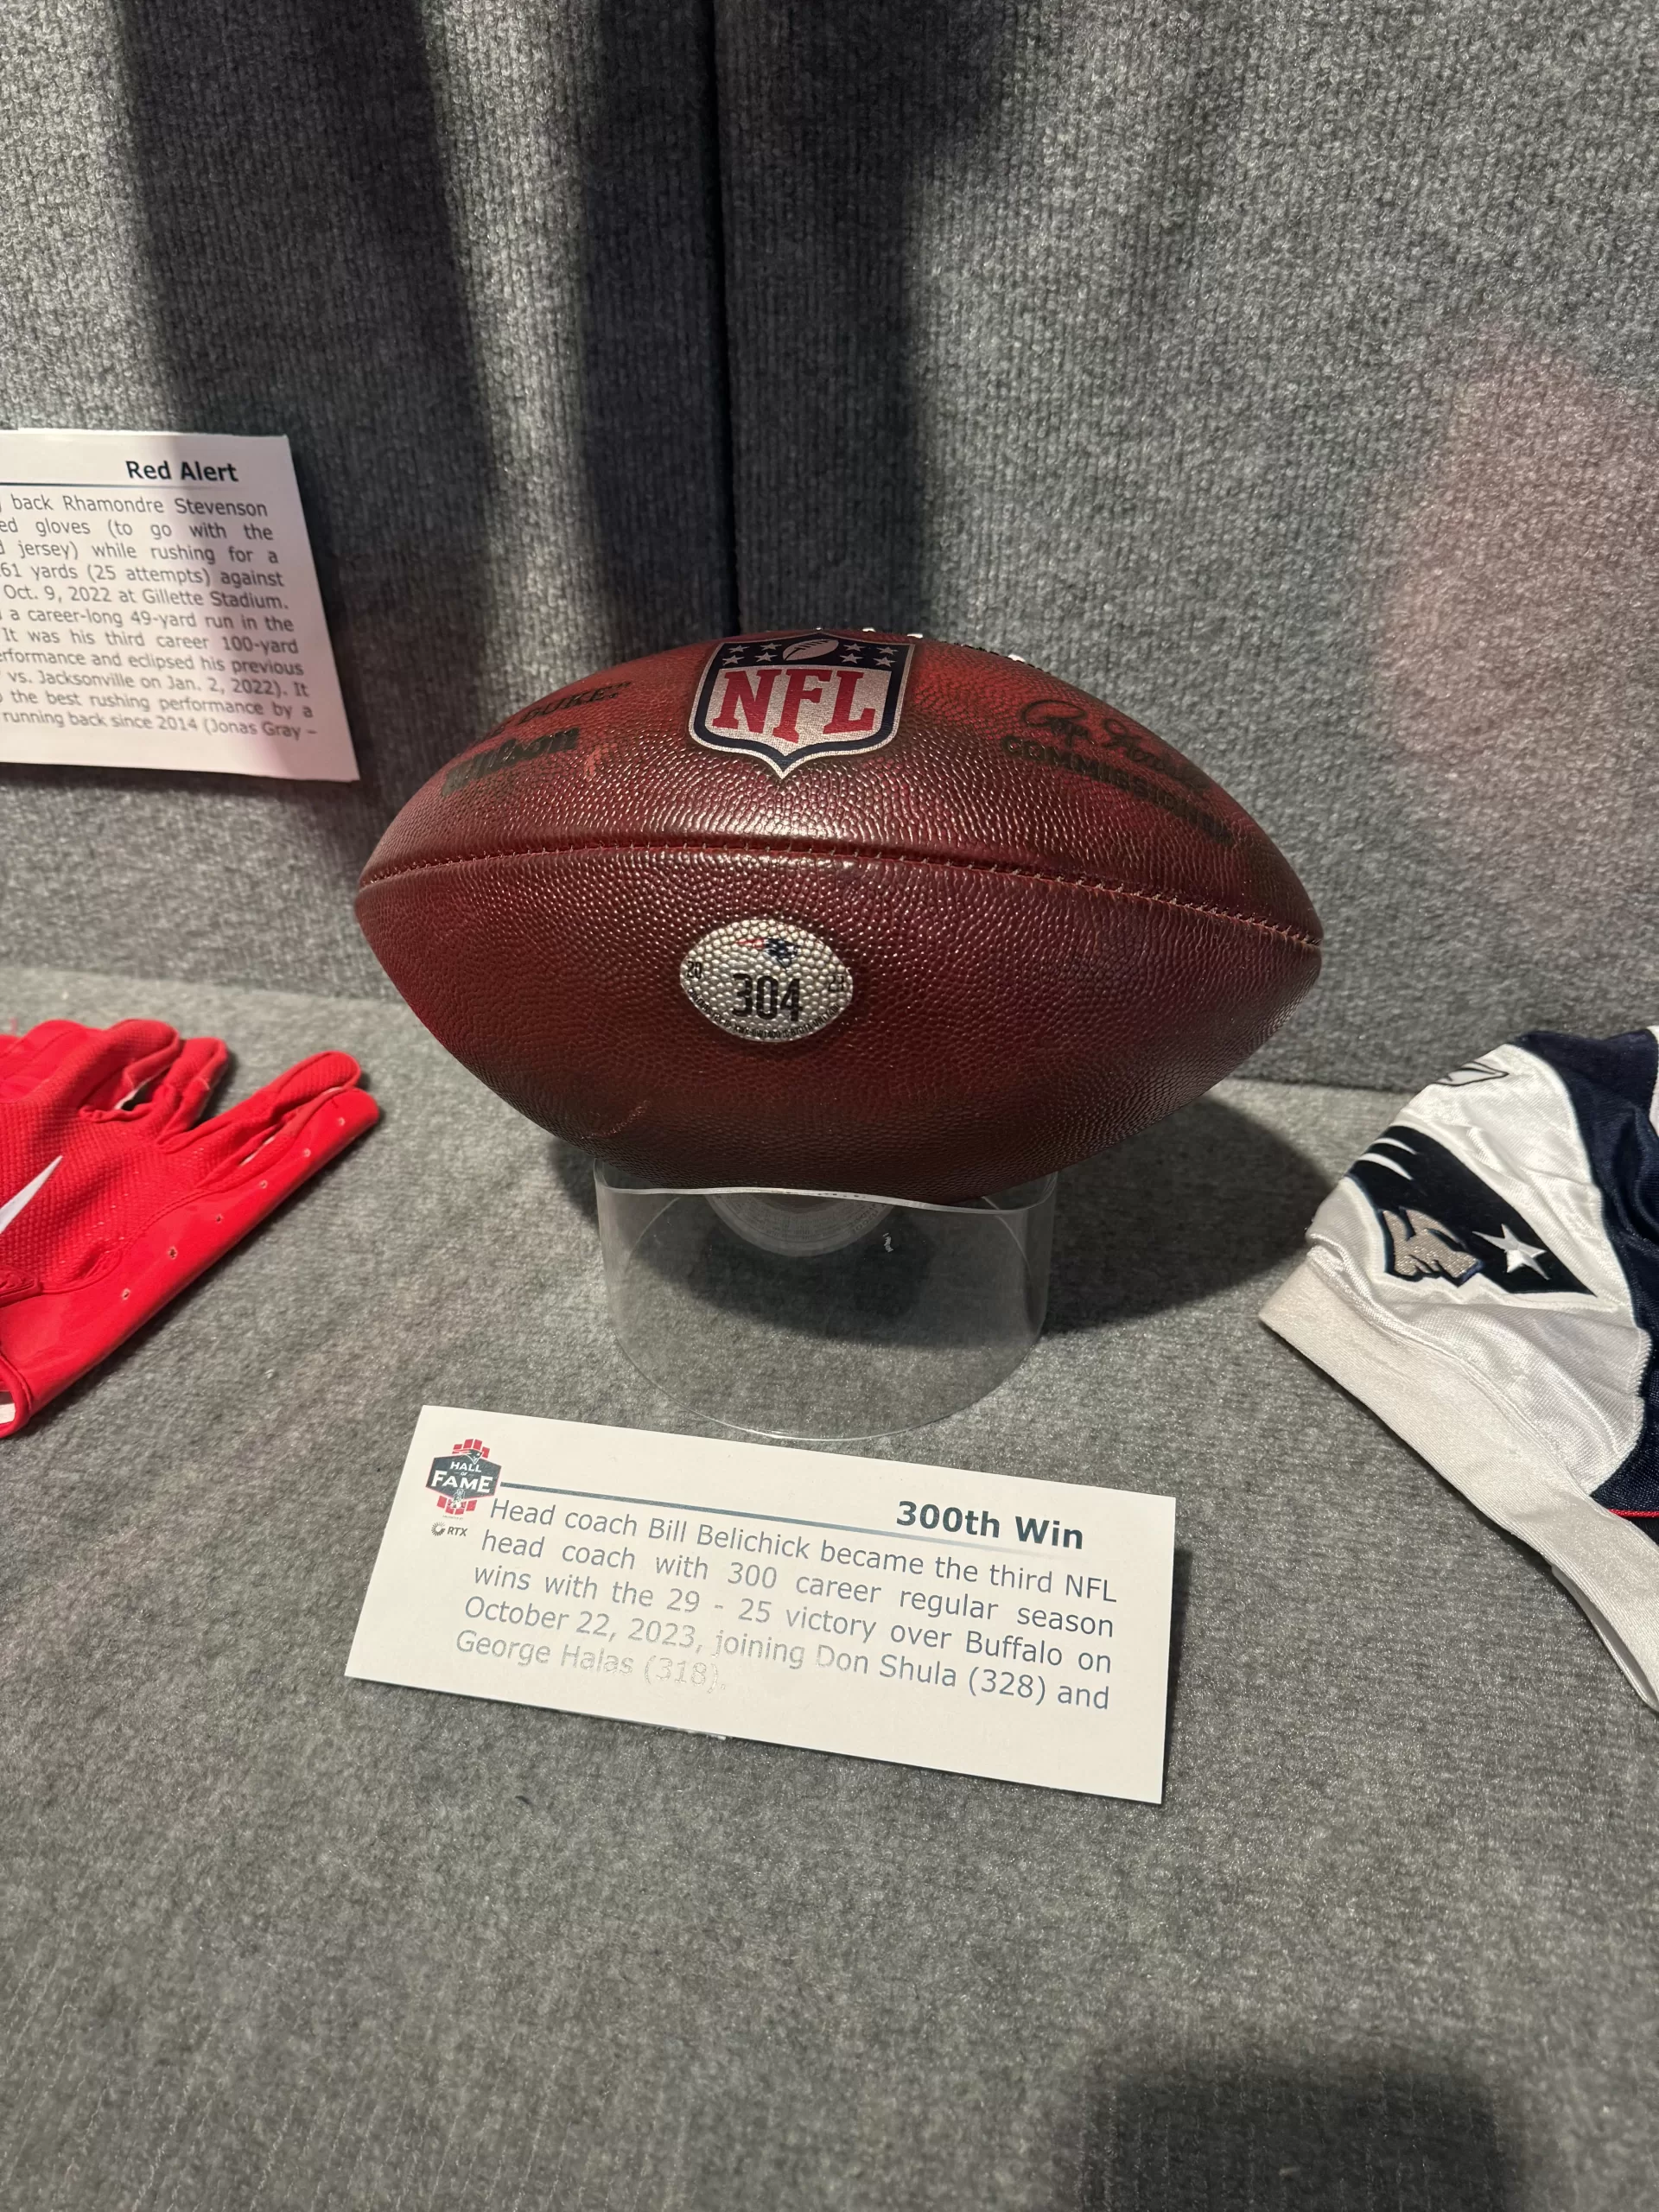 A football in a museum. The football was in a game of NFL football from the New England Patriots vs. the Buffalo Bills on October 22, 2023. The Patriots won giving Bill Belichick his 300th career win as a head coach. 